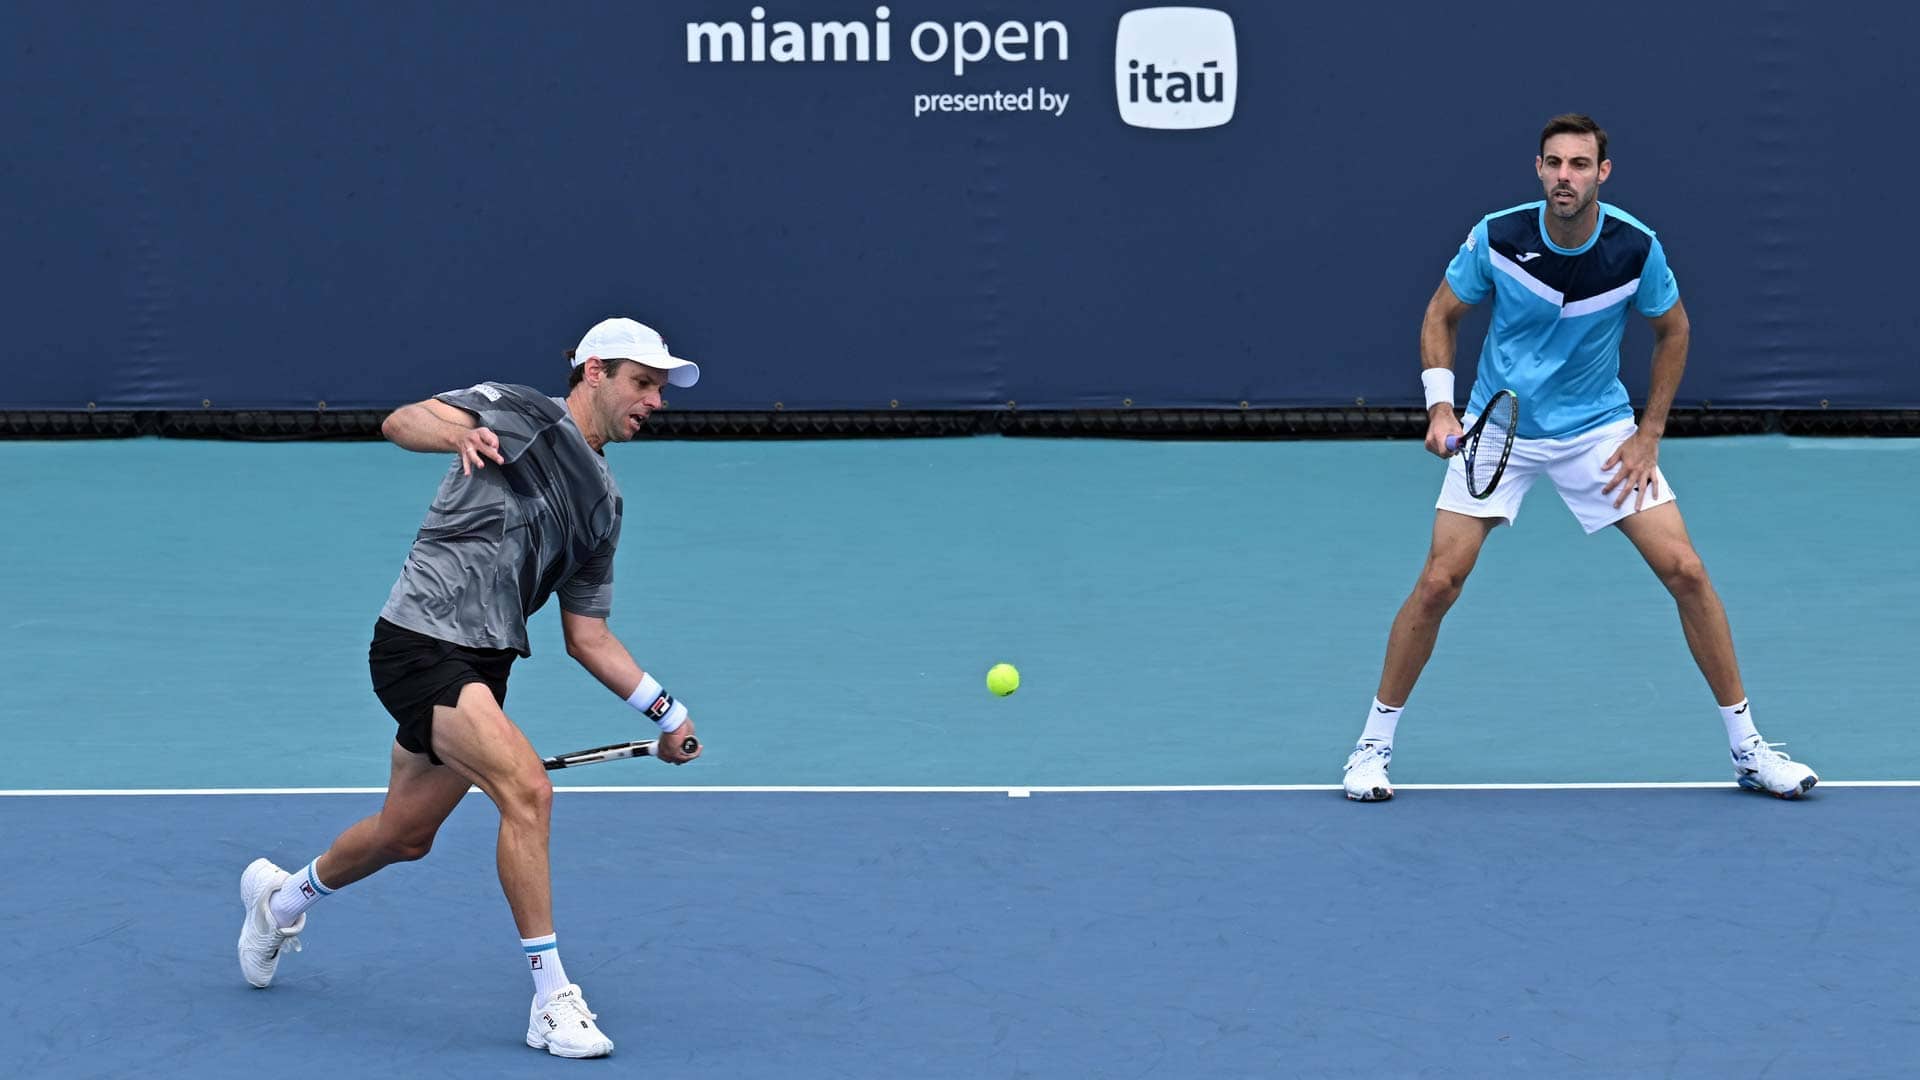 Marcel Granollers and Horacio Zeballos saved both break points against them in the Miami second round.